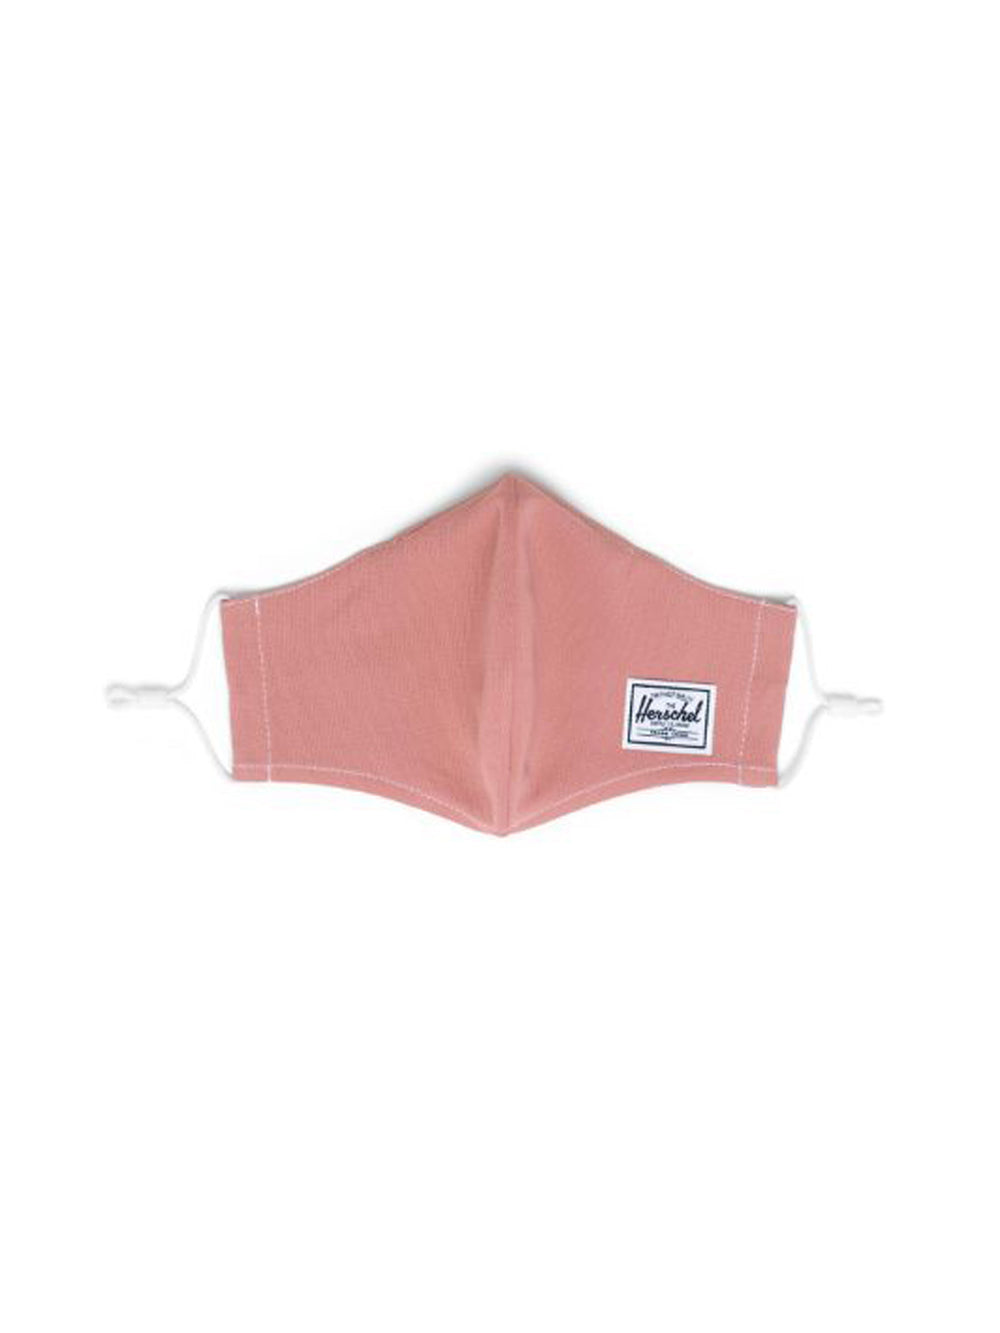 HERSCHEL SUPPLY CO. CLASSIC FITTED FACE MASK - ASHROSE - CLEARANCE